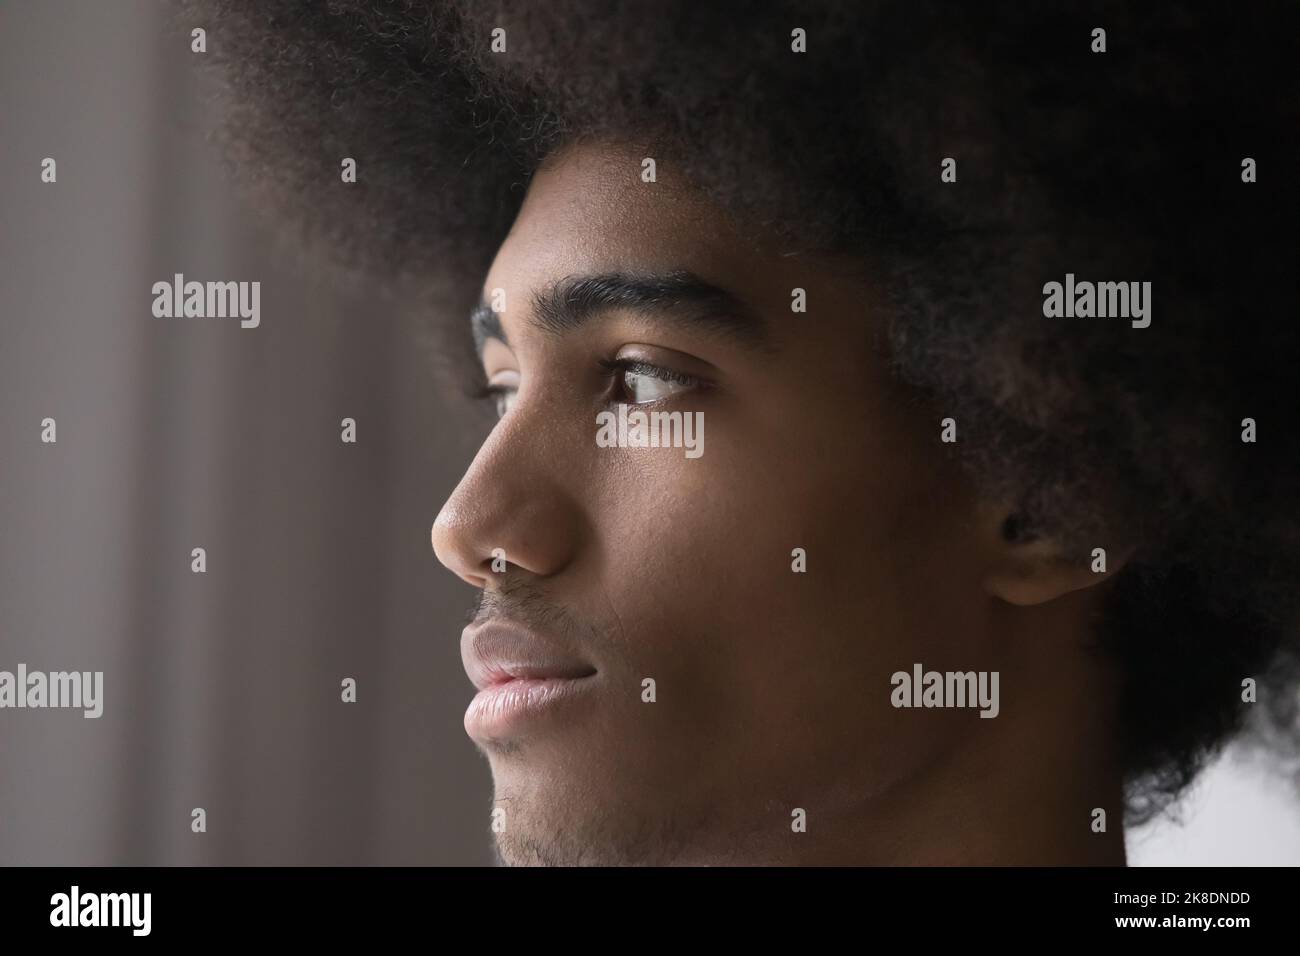 Serious or concerned African guy with curly hair staring aside Stock Photo